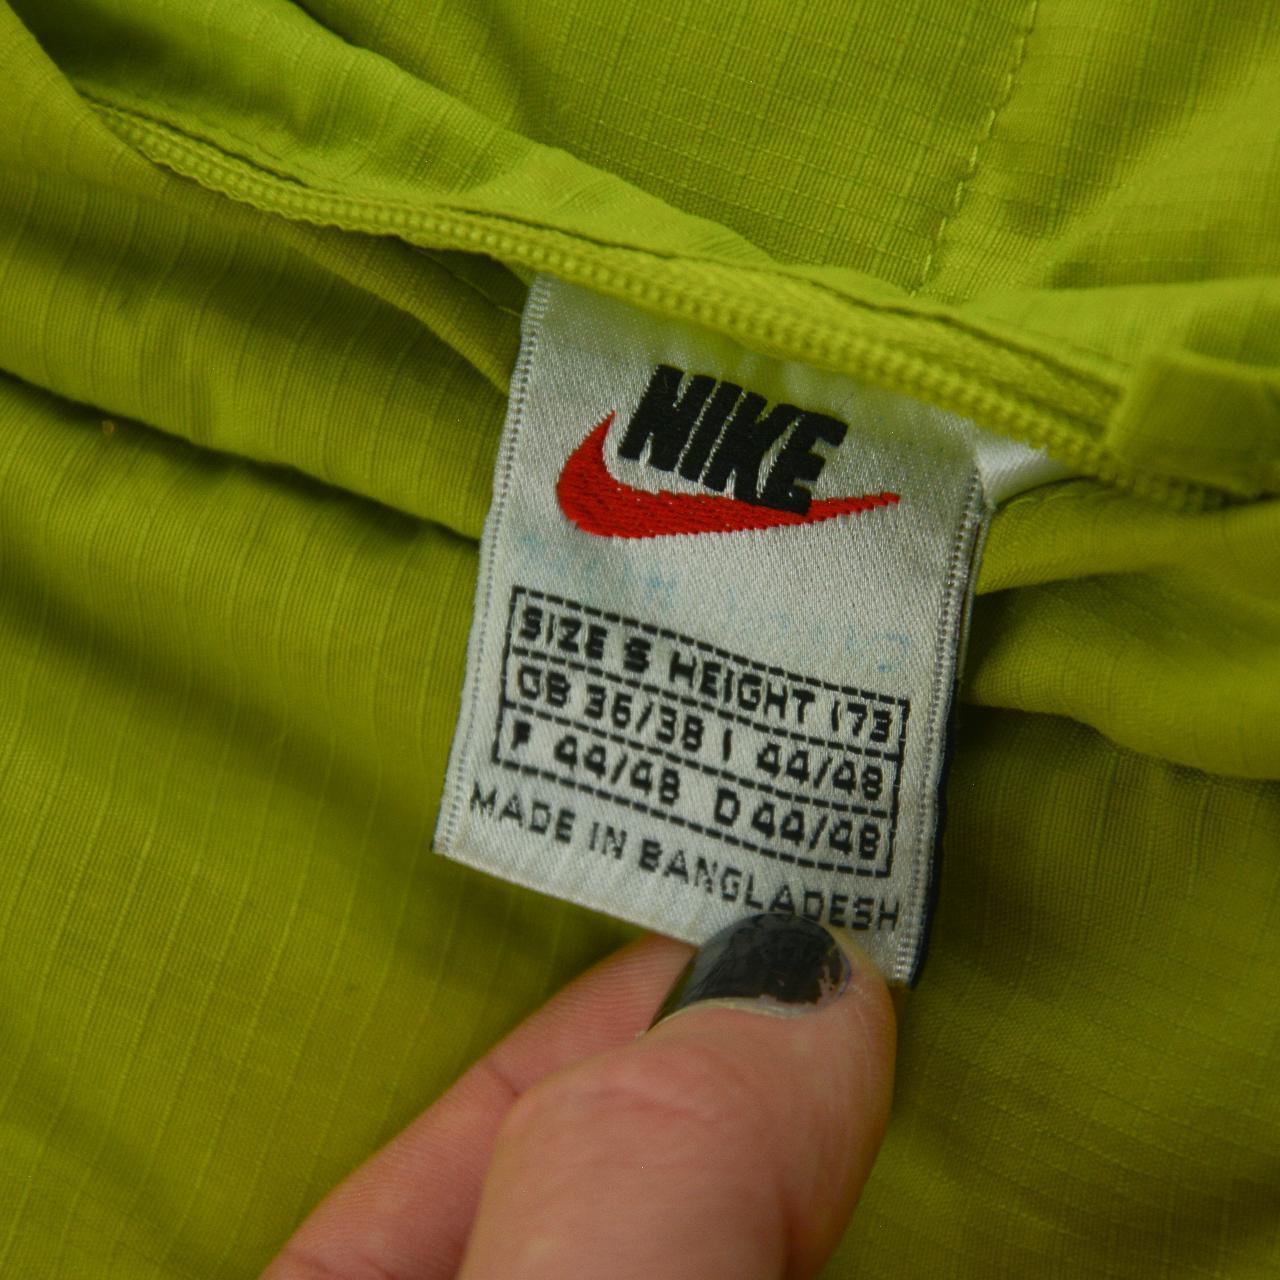 Vintage Nike Reversible Puffer Jacket Size M - Known Source